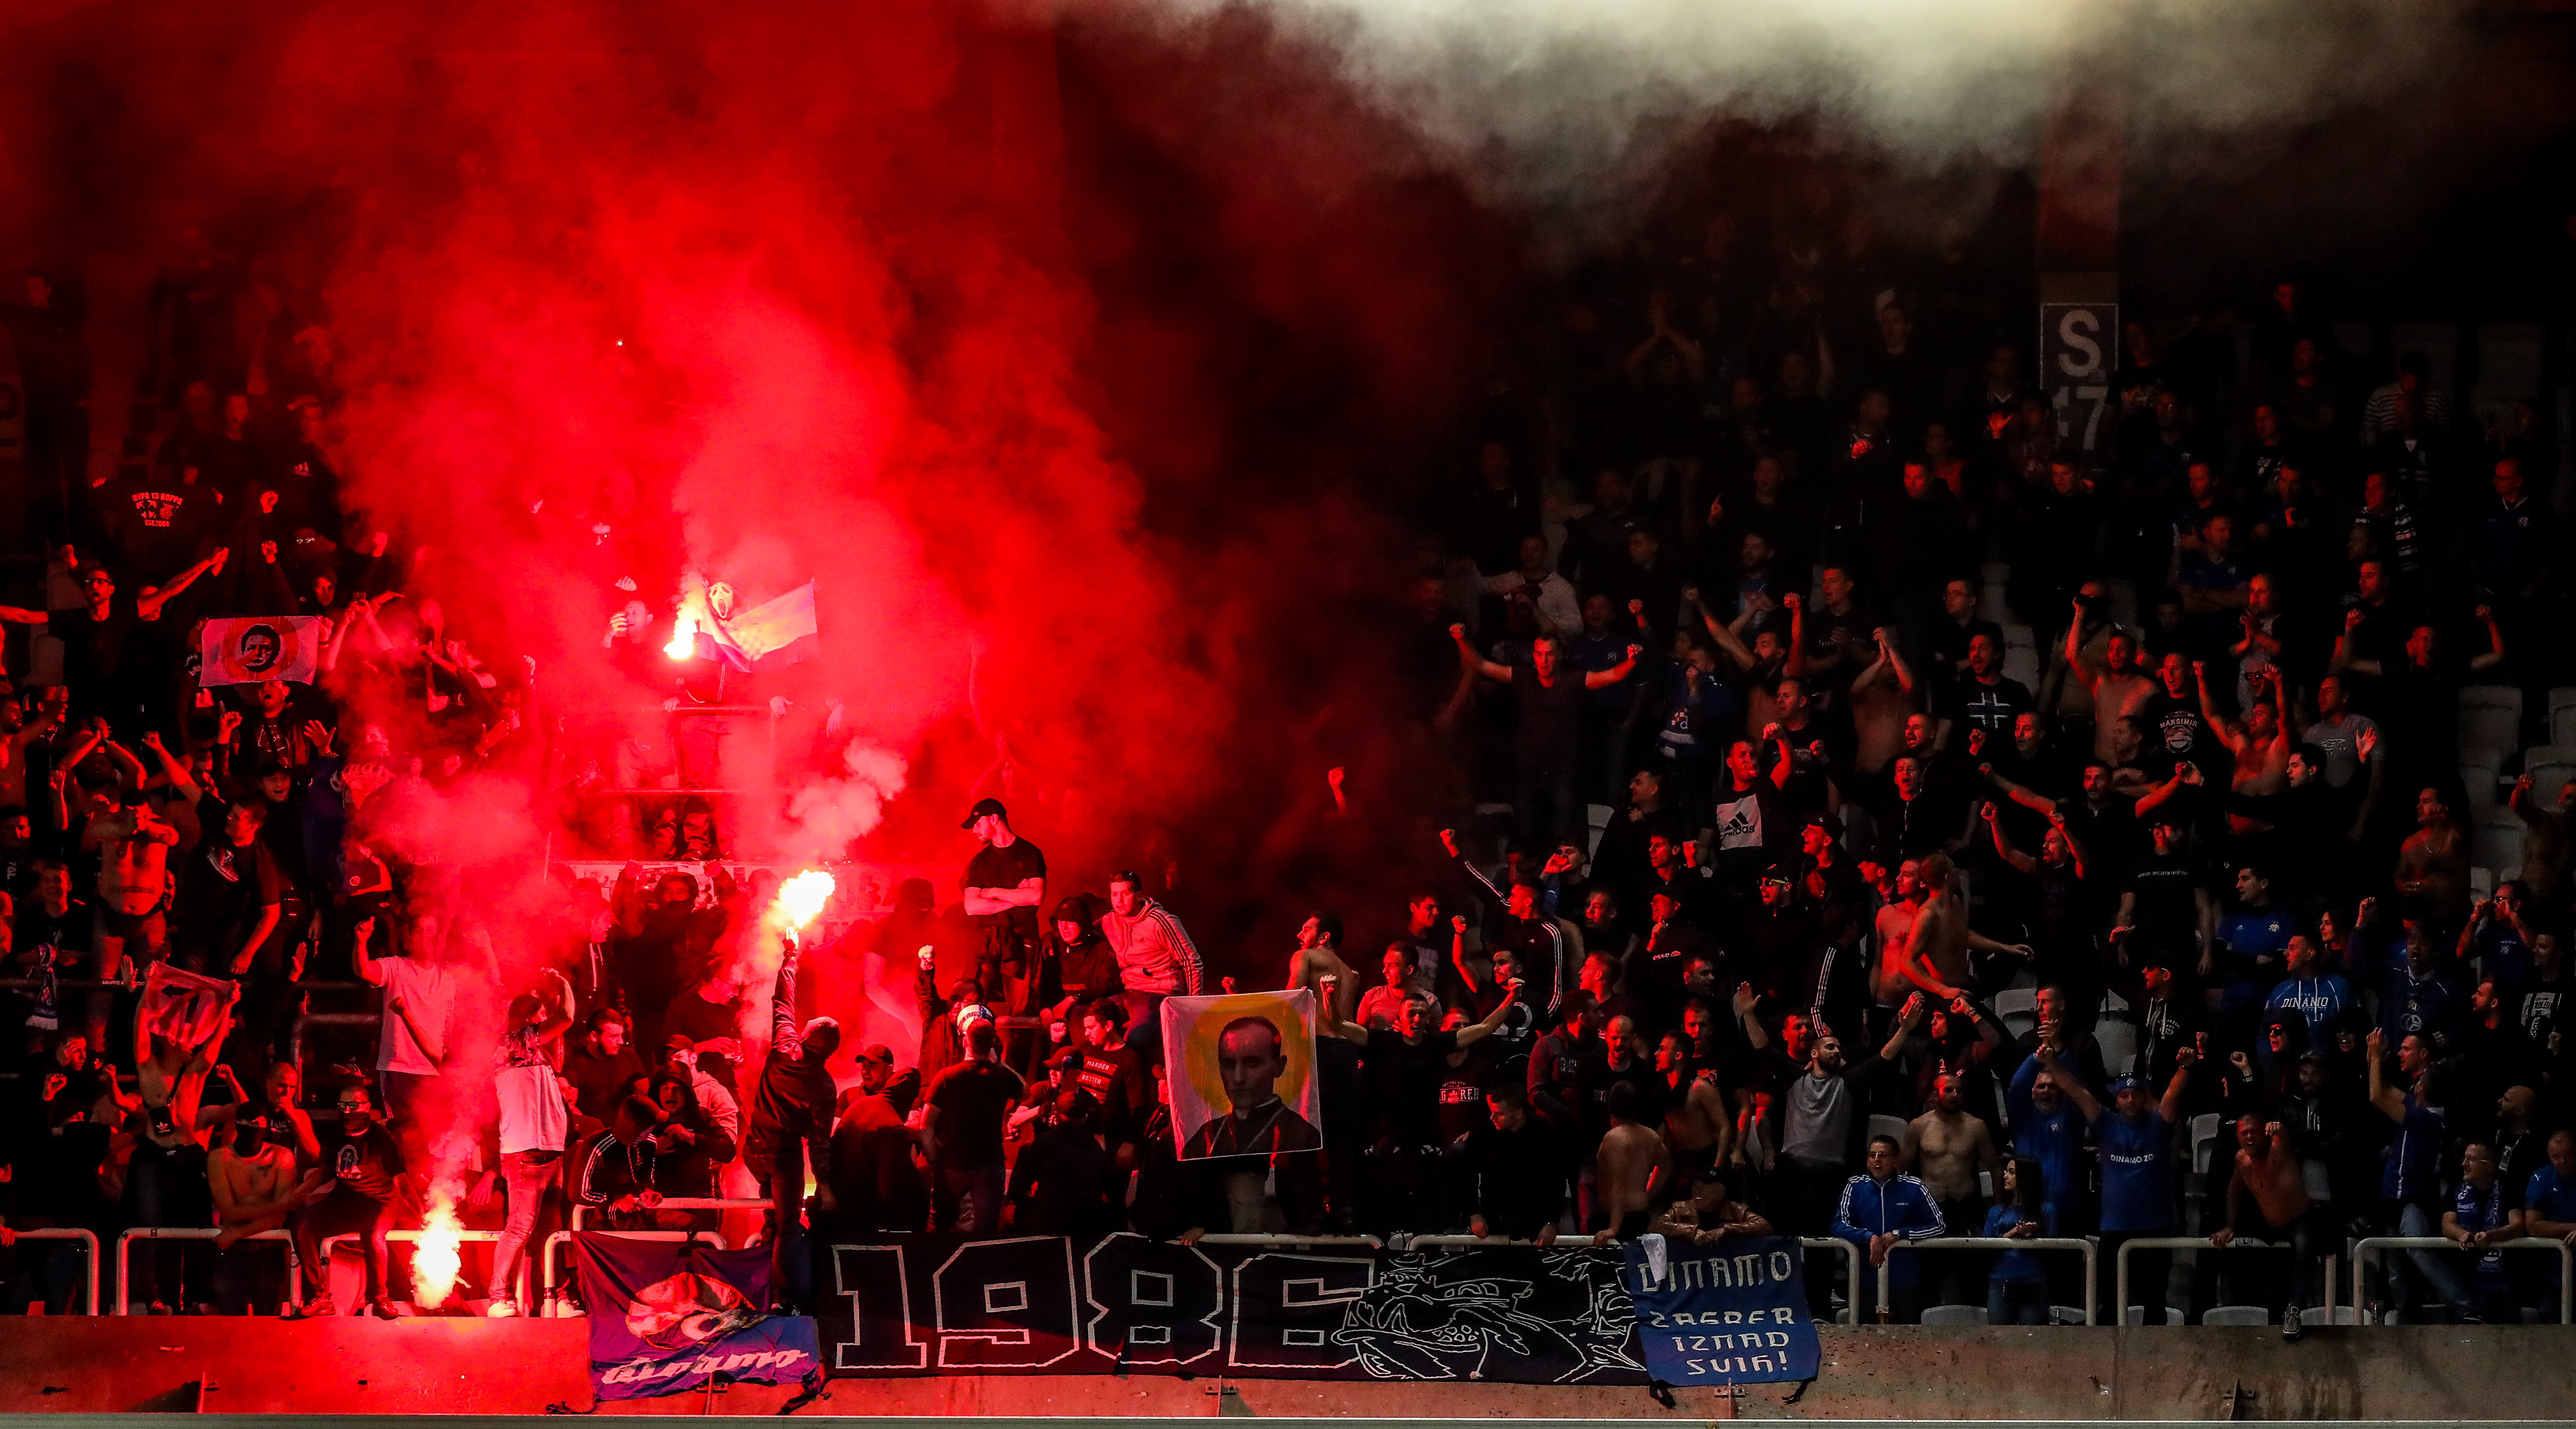 epa07069815 Dinamo Zagreb supporters light flares during the UEFA Europa League soccer match between RSC Anderlecht and Dinamo Zagreb  at the Constant Vanden Stock stadium in Anderlecht, Belgium, 04 October 2018.  EPA/STEPHANIE LECOCQ